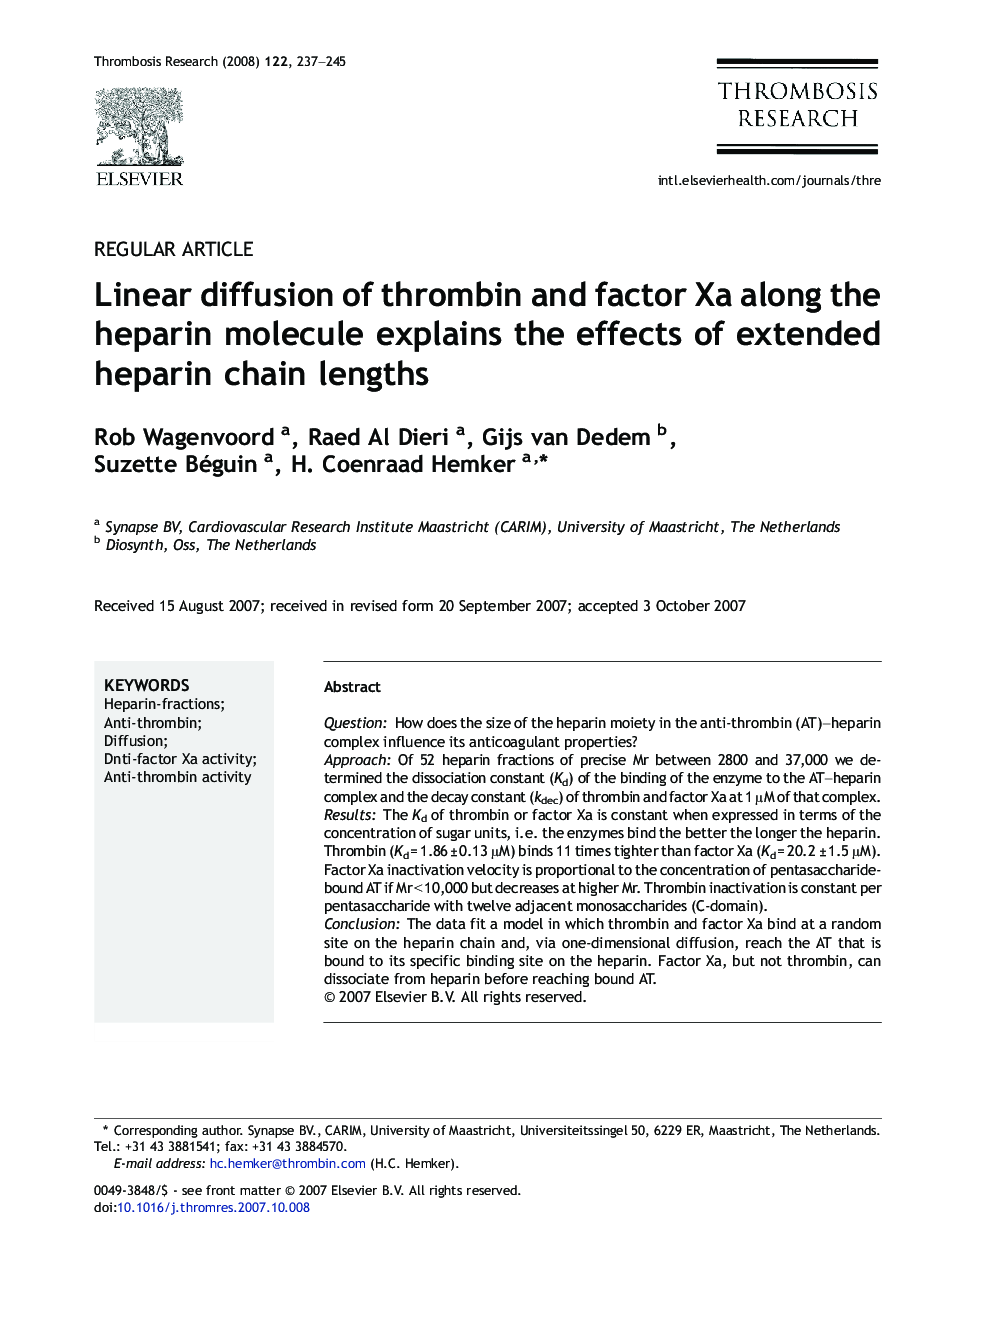 Linear diffusion of thrombin and factor Xa along the heparin molecule explains the effects of extended heparin chain lengths